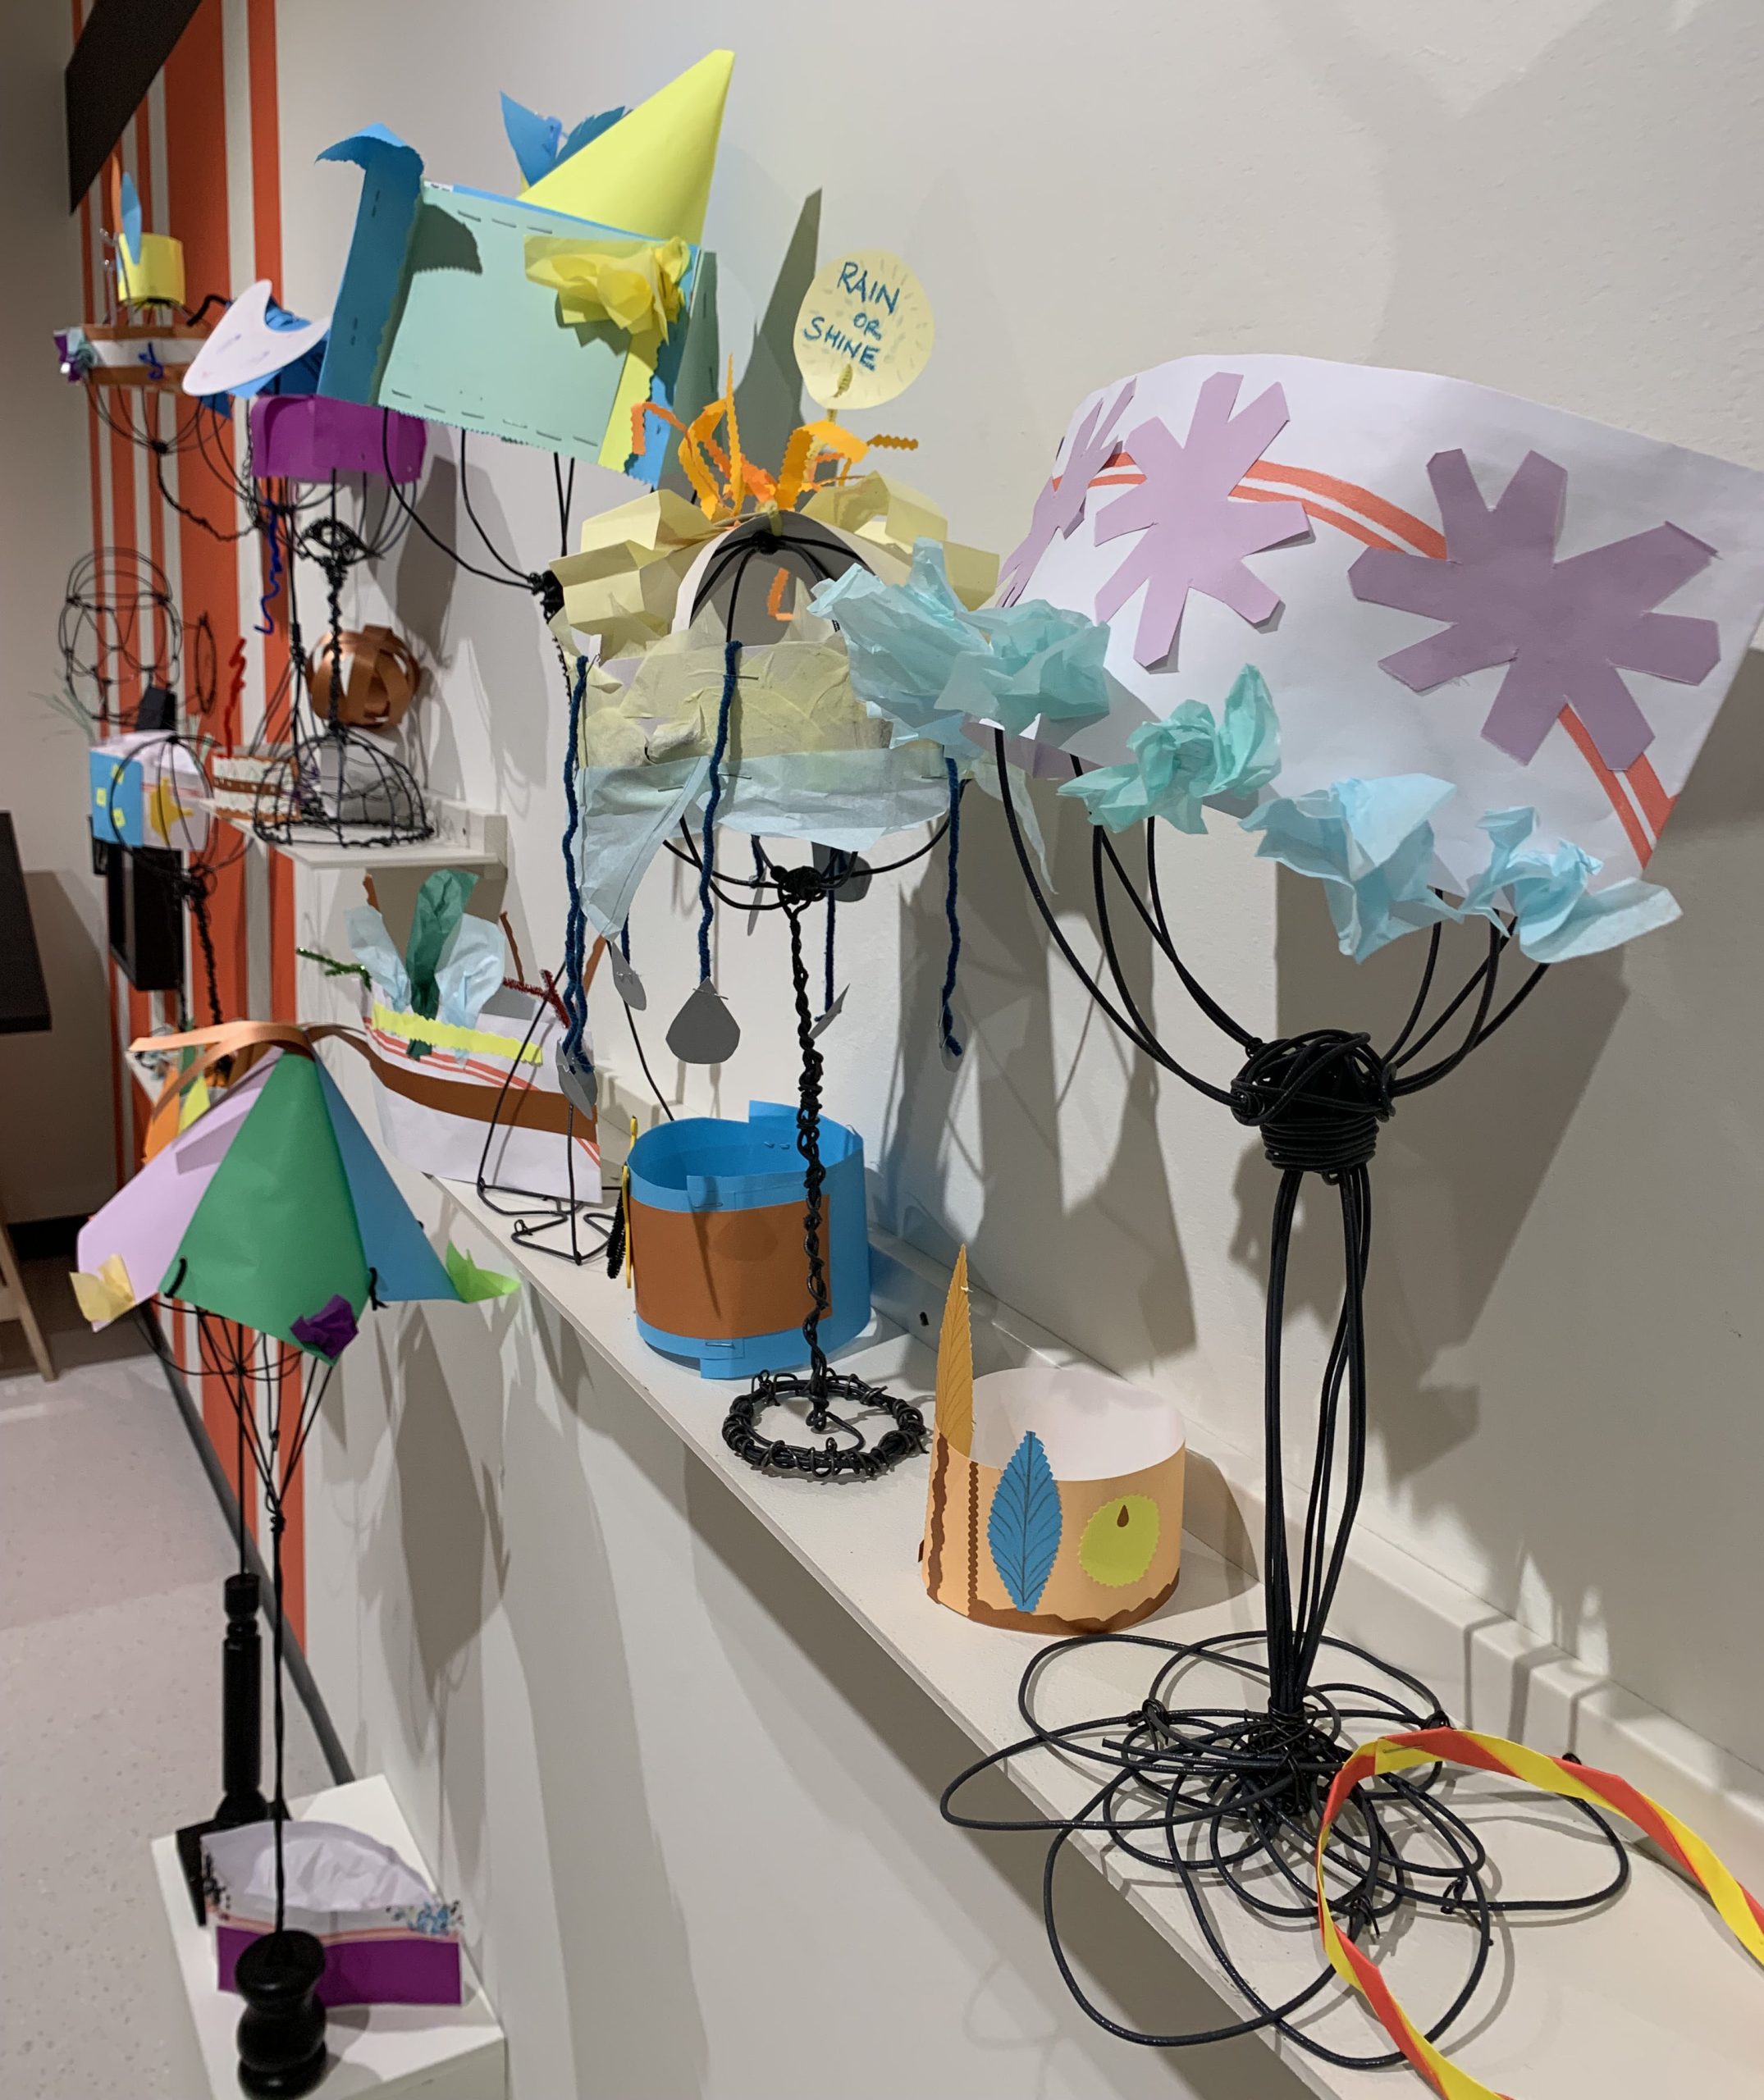 Examples of hats made in the Museum's interactive gallery art park